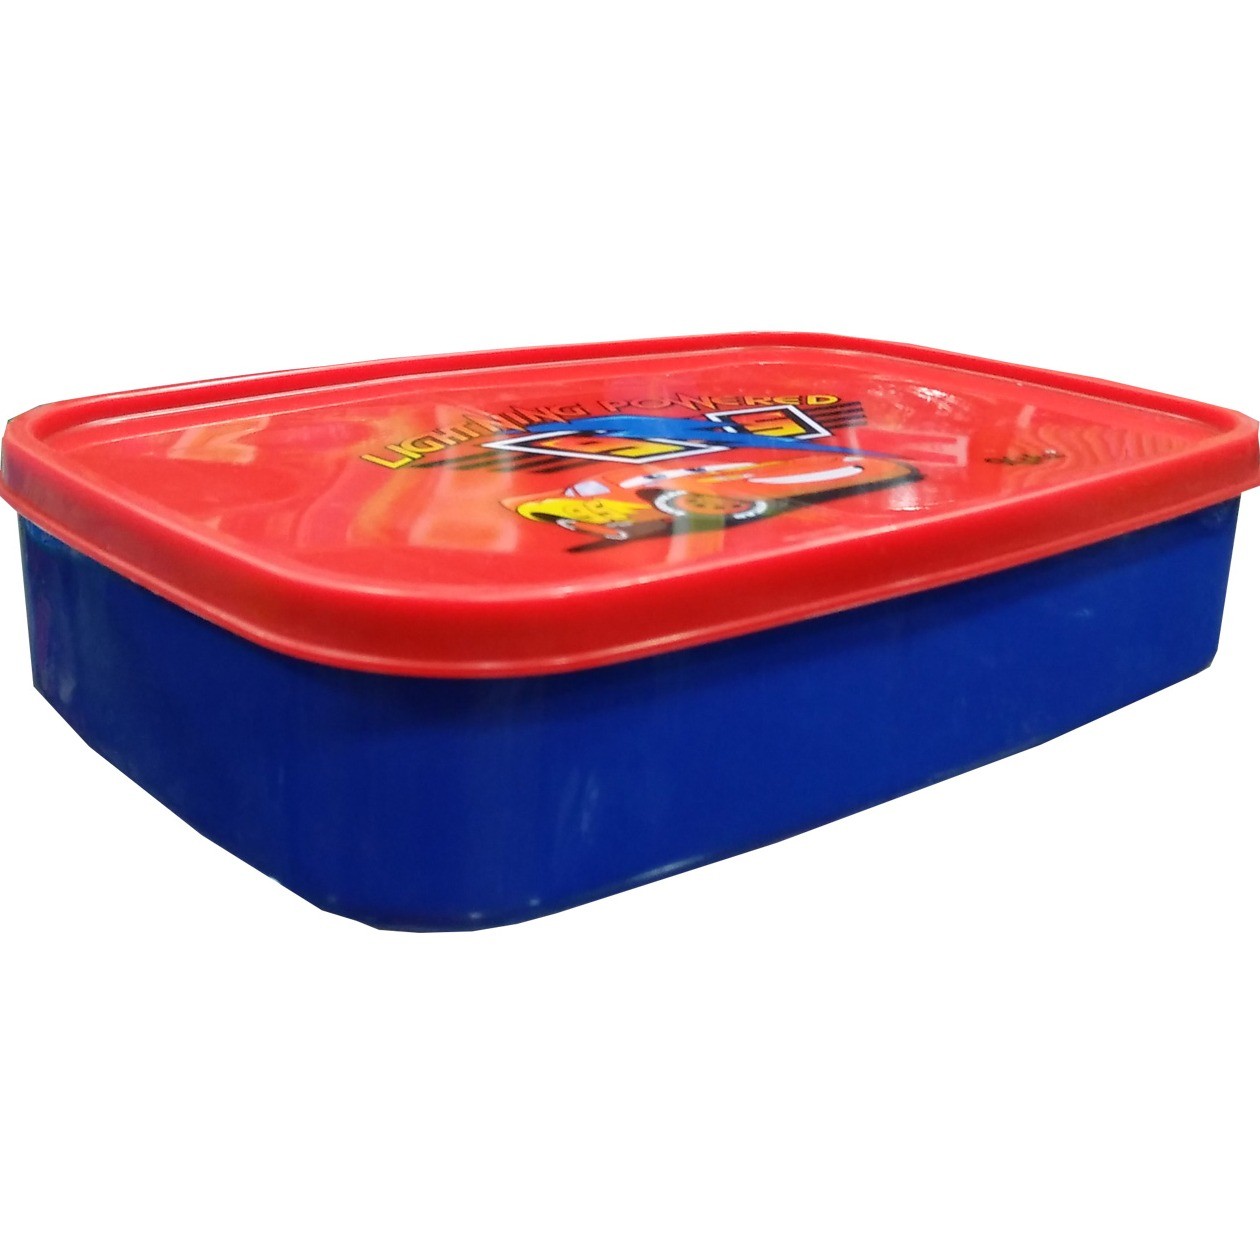 Car Racer Themed lunch box - Blue & Red